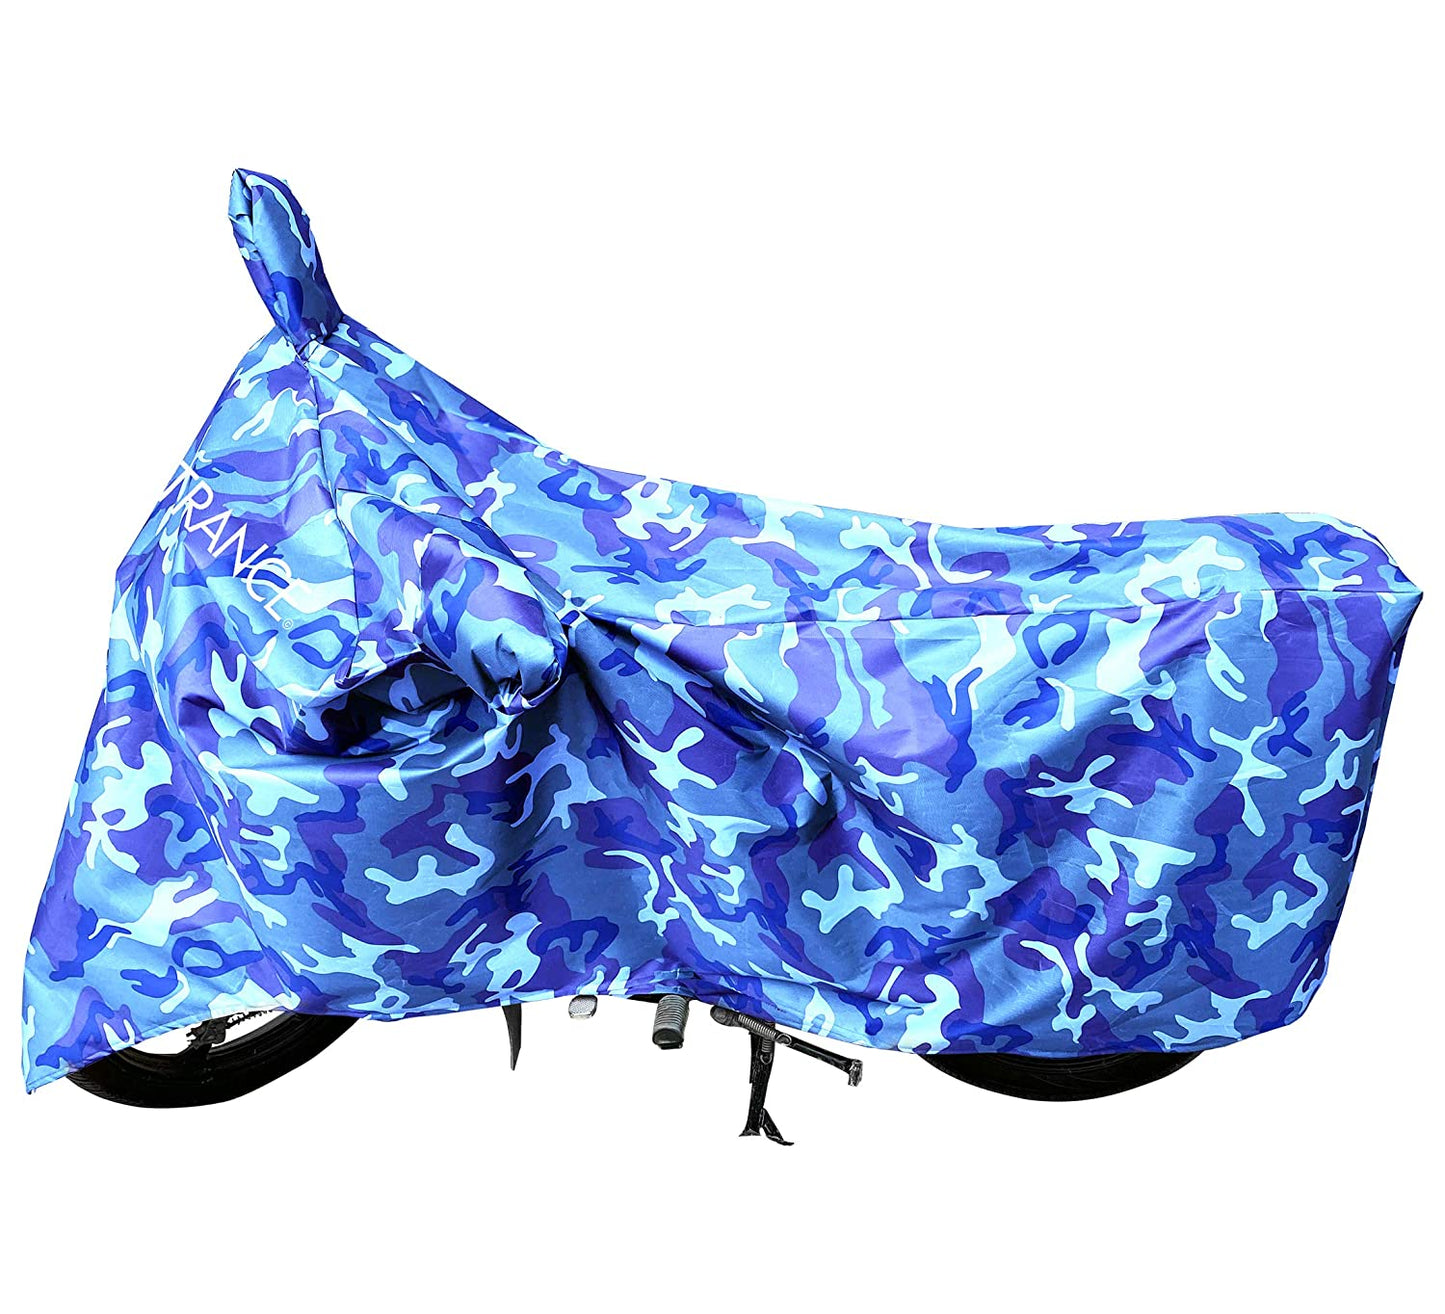 MotoTrance Jungle Bike Body Covers For Royal Enfield Classic Chrome - Interlock-Stitched Waterproof and Heat Resistant with Mirror Pockets